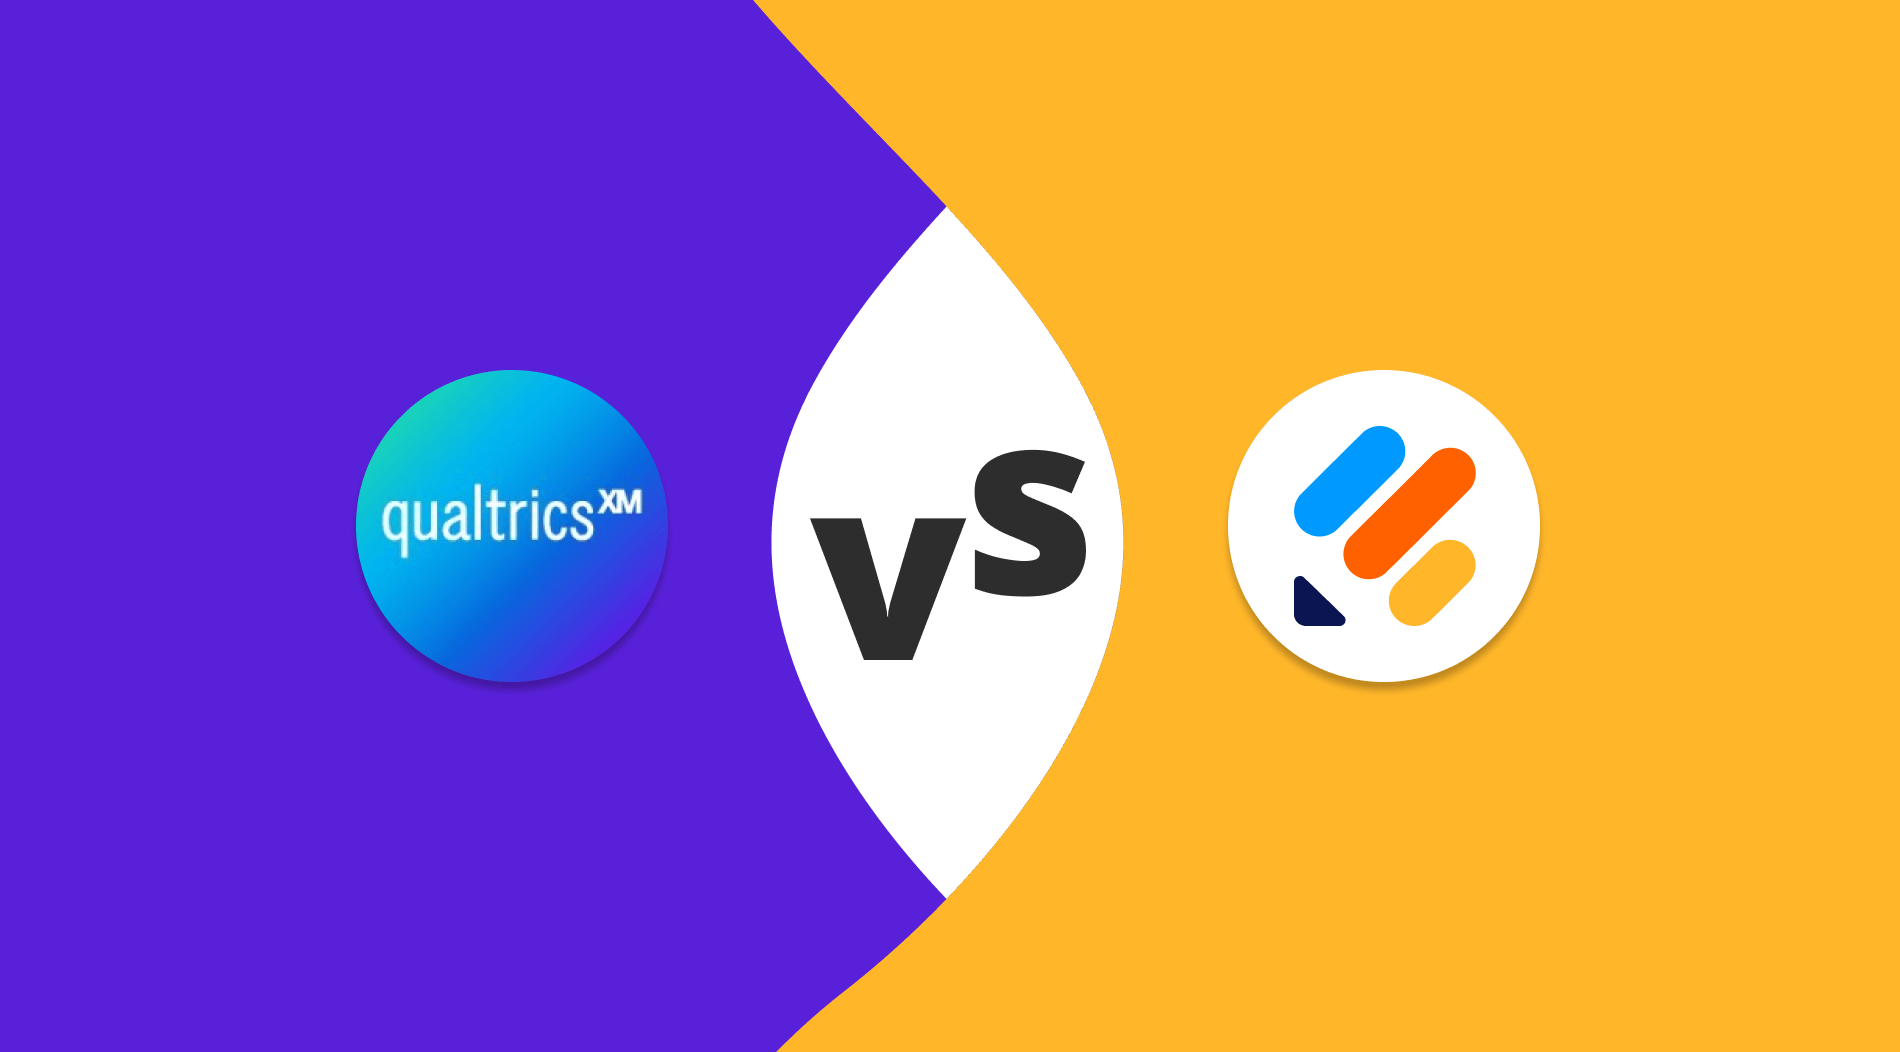 Qualtrics vs. Jotform: Which one is better?